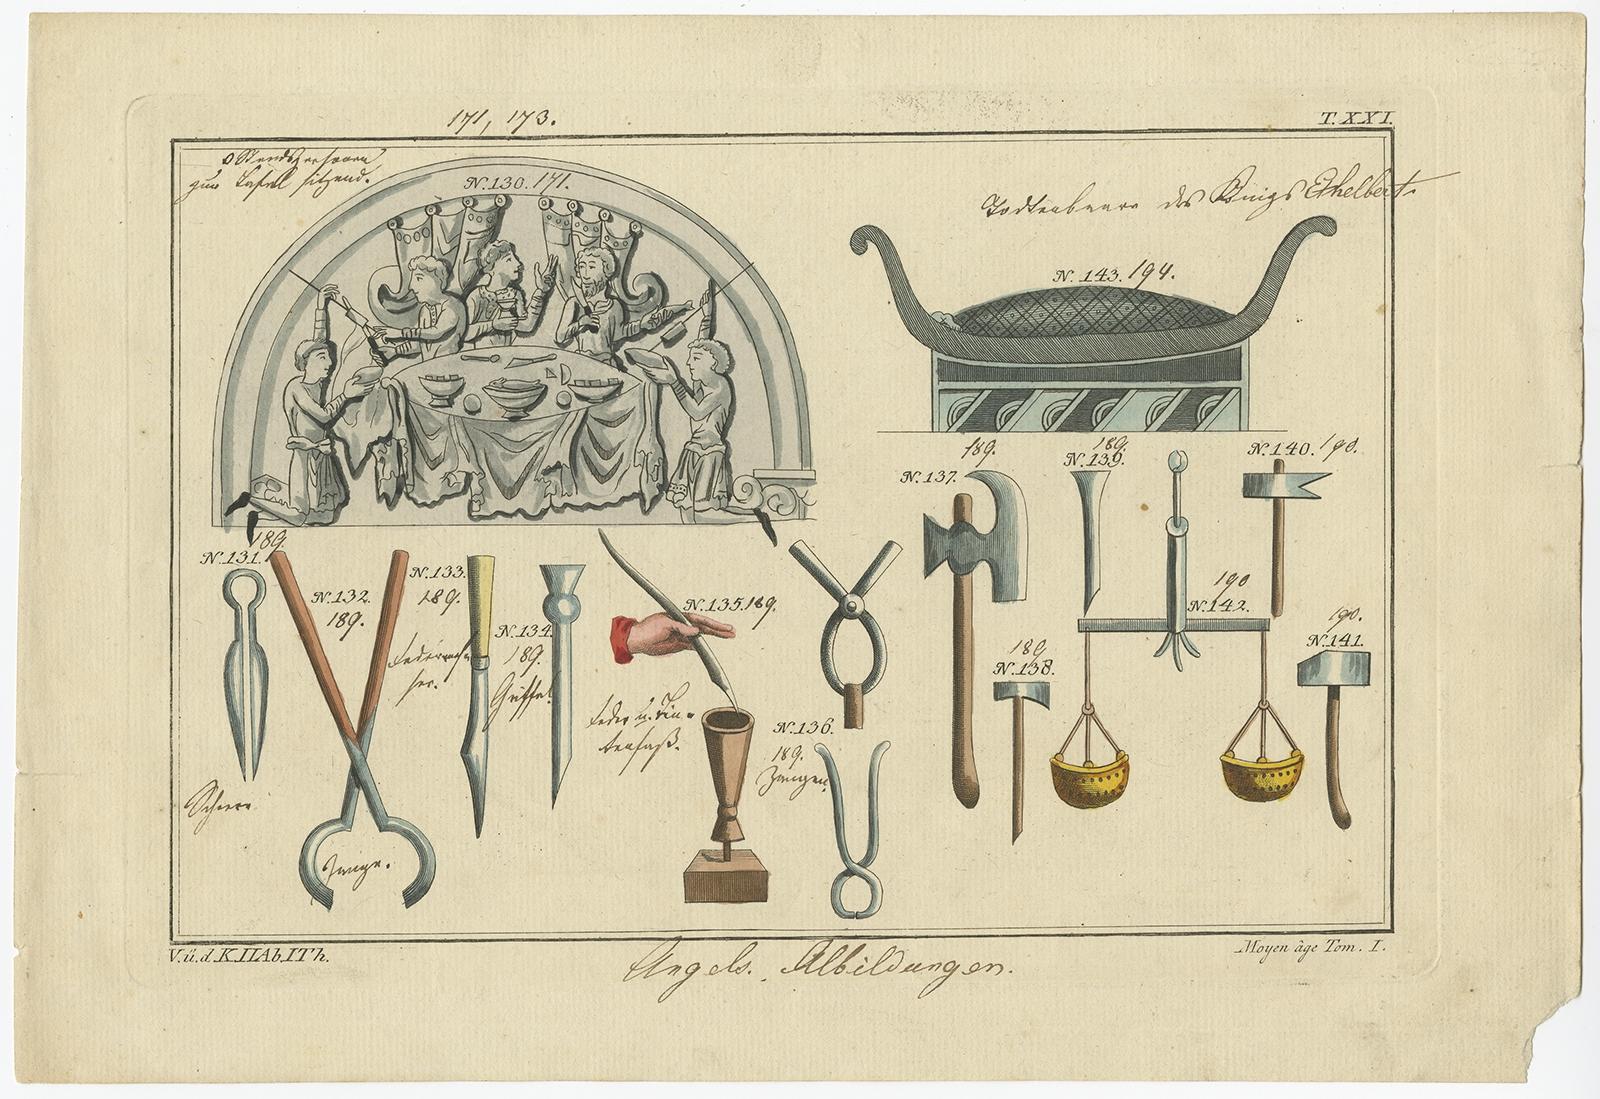 Untitled print of Anglo Saxon banquet, scissors, tongs, penknife, stylus, feather and inkwell, small pliers, carpenter's ax, hammers, balance and the funeral stretcher of King Ethelbert. 

This print originates from: Historical Picture of the